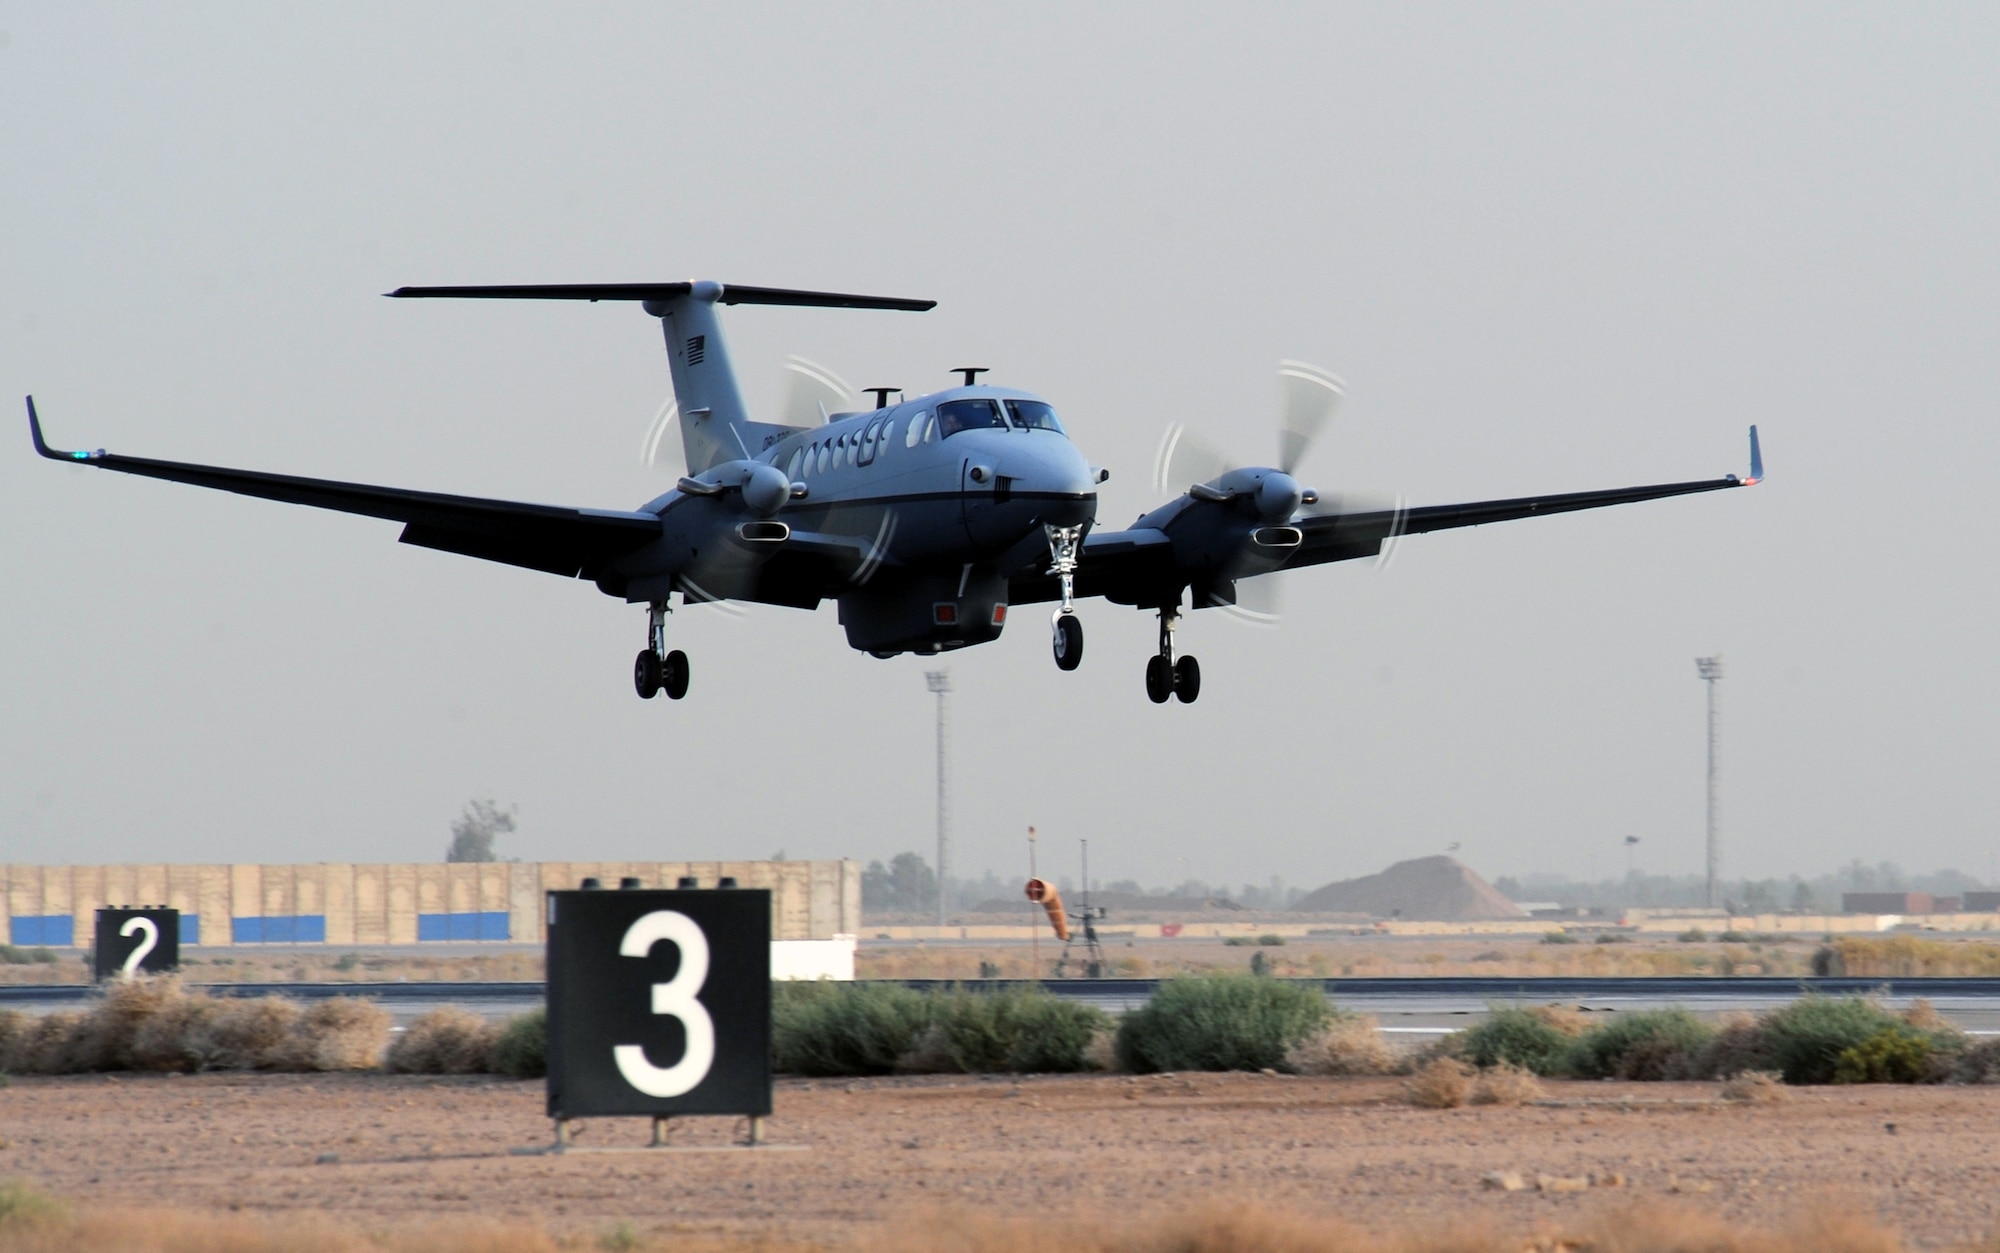 The first MC-12 Liberty aircraft in-theater lands after its first combat sortie at approximately 6:20 p.m. local time June 10 at Joint Base Balad, Iraq. The Air Force's newest intelligence, surveillance and reconnaissance platform, the MC-12 is a medium-altitude manned special-mission turbo prop aircraft that supports coalition and joint ground forces. (U.S. Air Force photo/Senior Airman Tiffany Trojca)